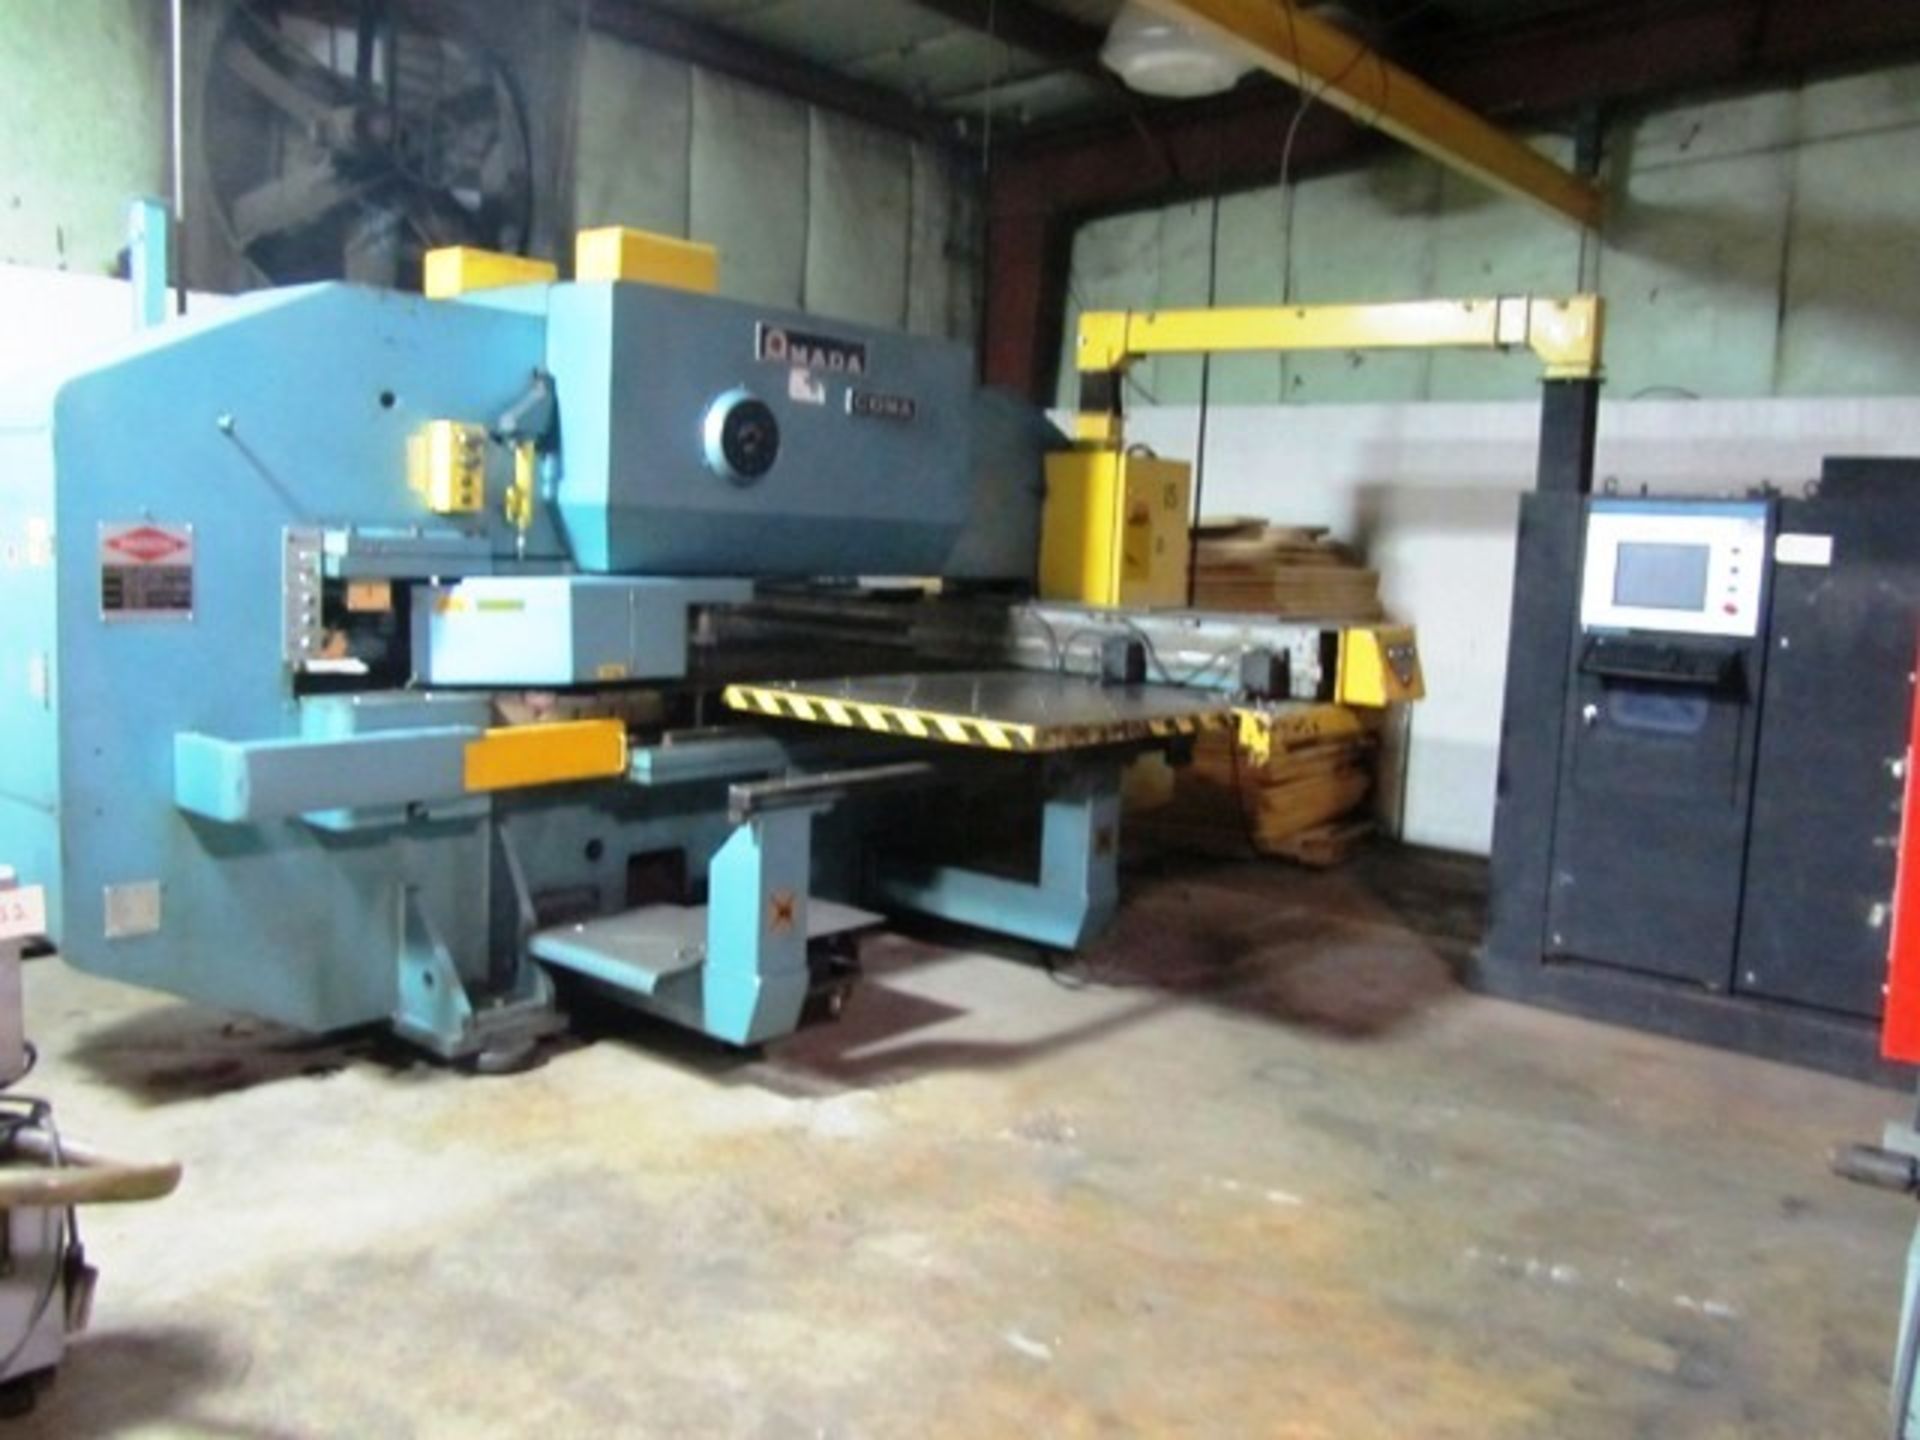 Amada Coma 505072 50 Ton CNC Turret Punch with 48 Station Turret, Approx. 60'' x 138'' Ball Transfer